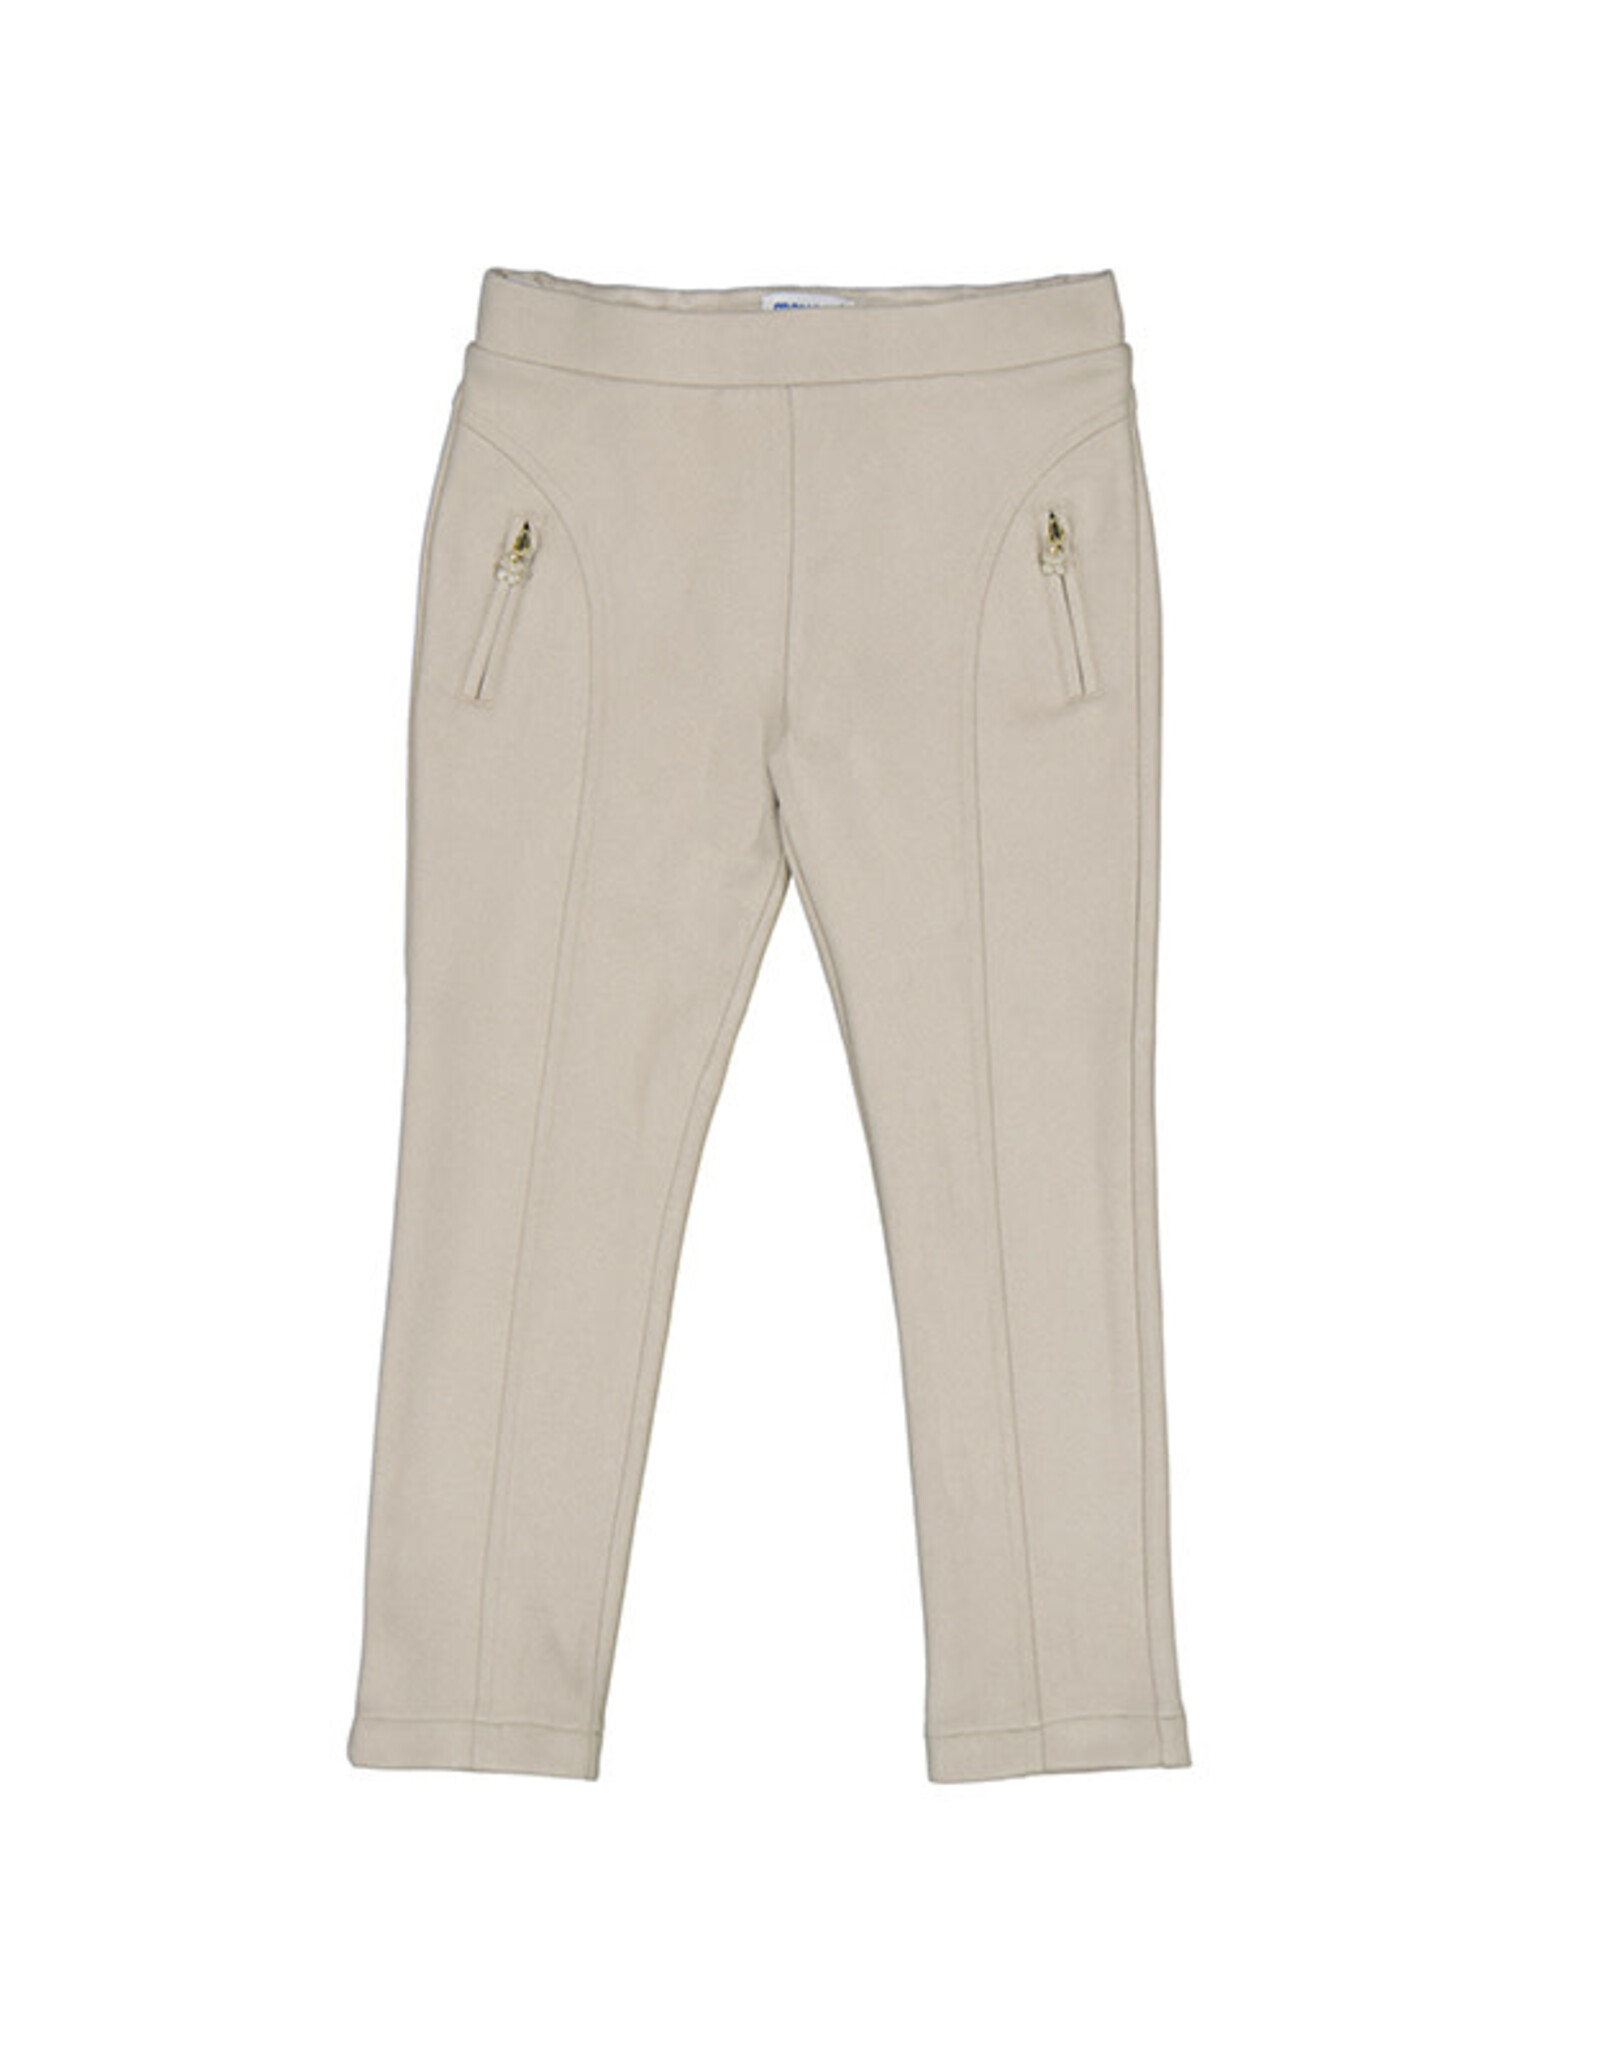 Mayoral Oat Pants with Zipper Pockets